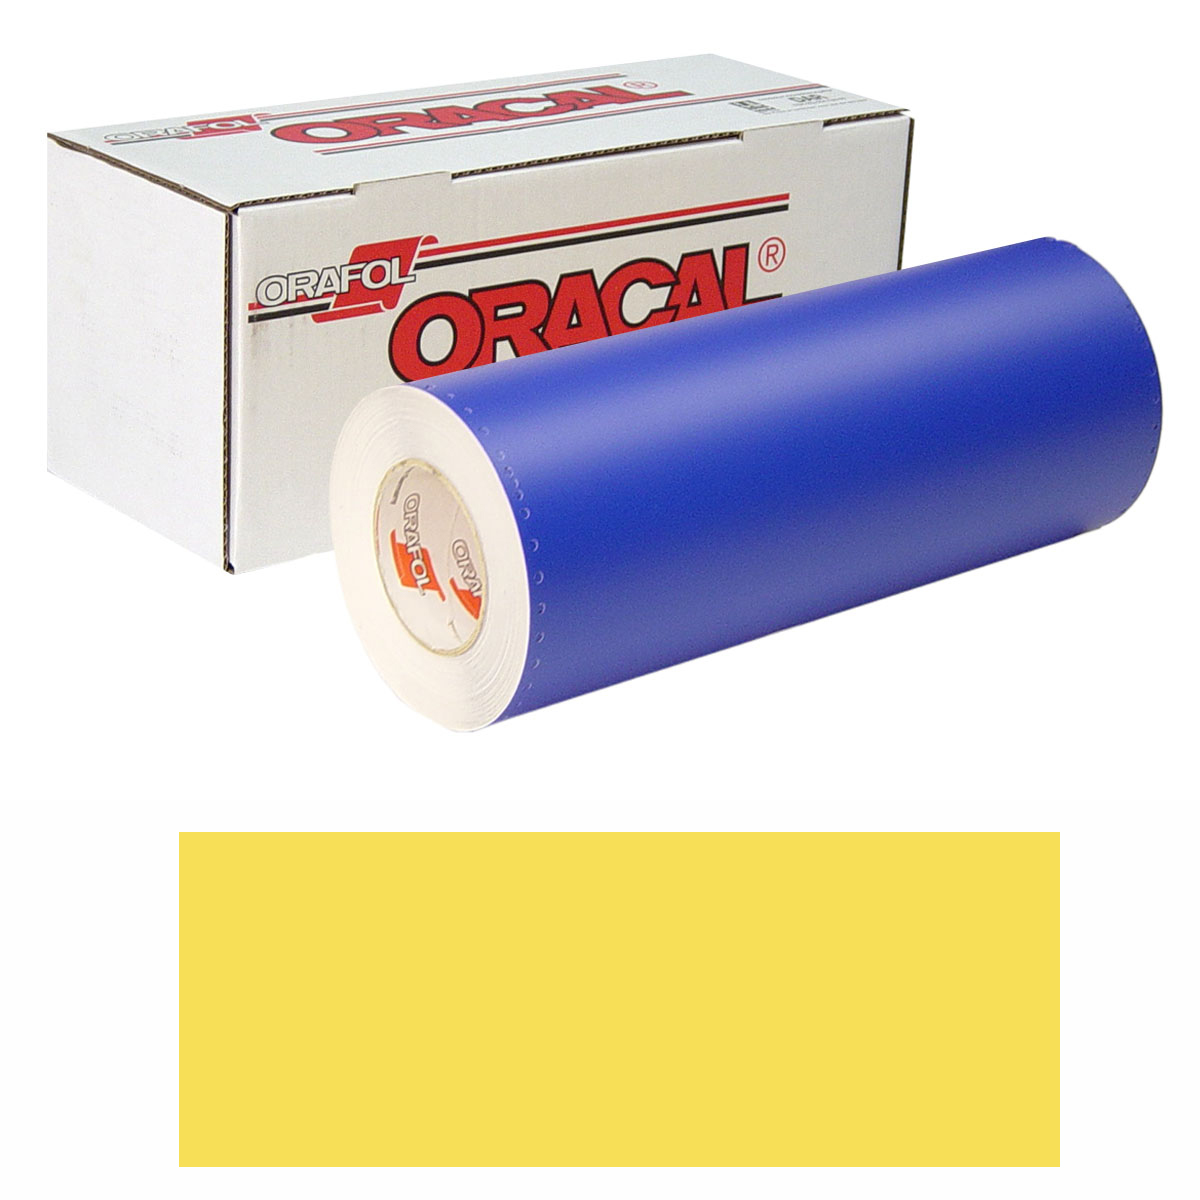 ORACAL 8300 30in X 50yd 021 Yellow